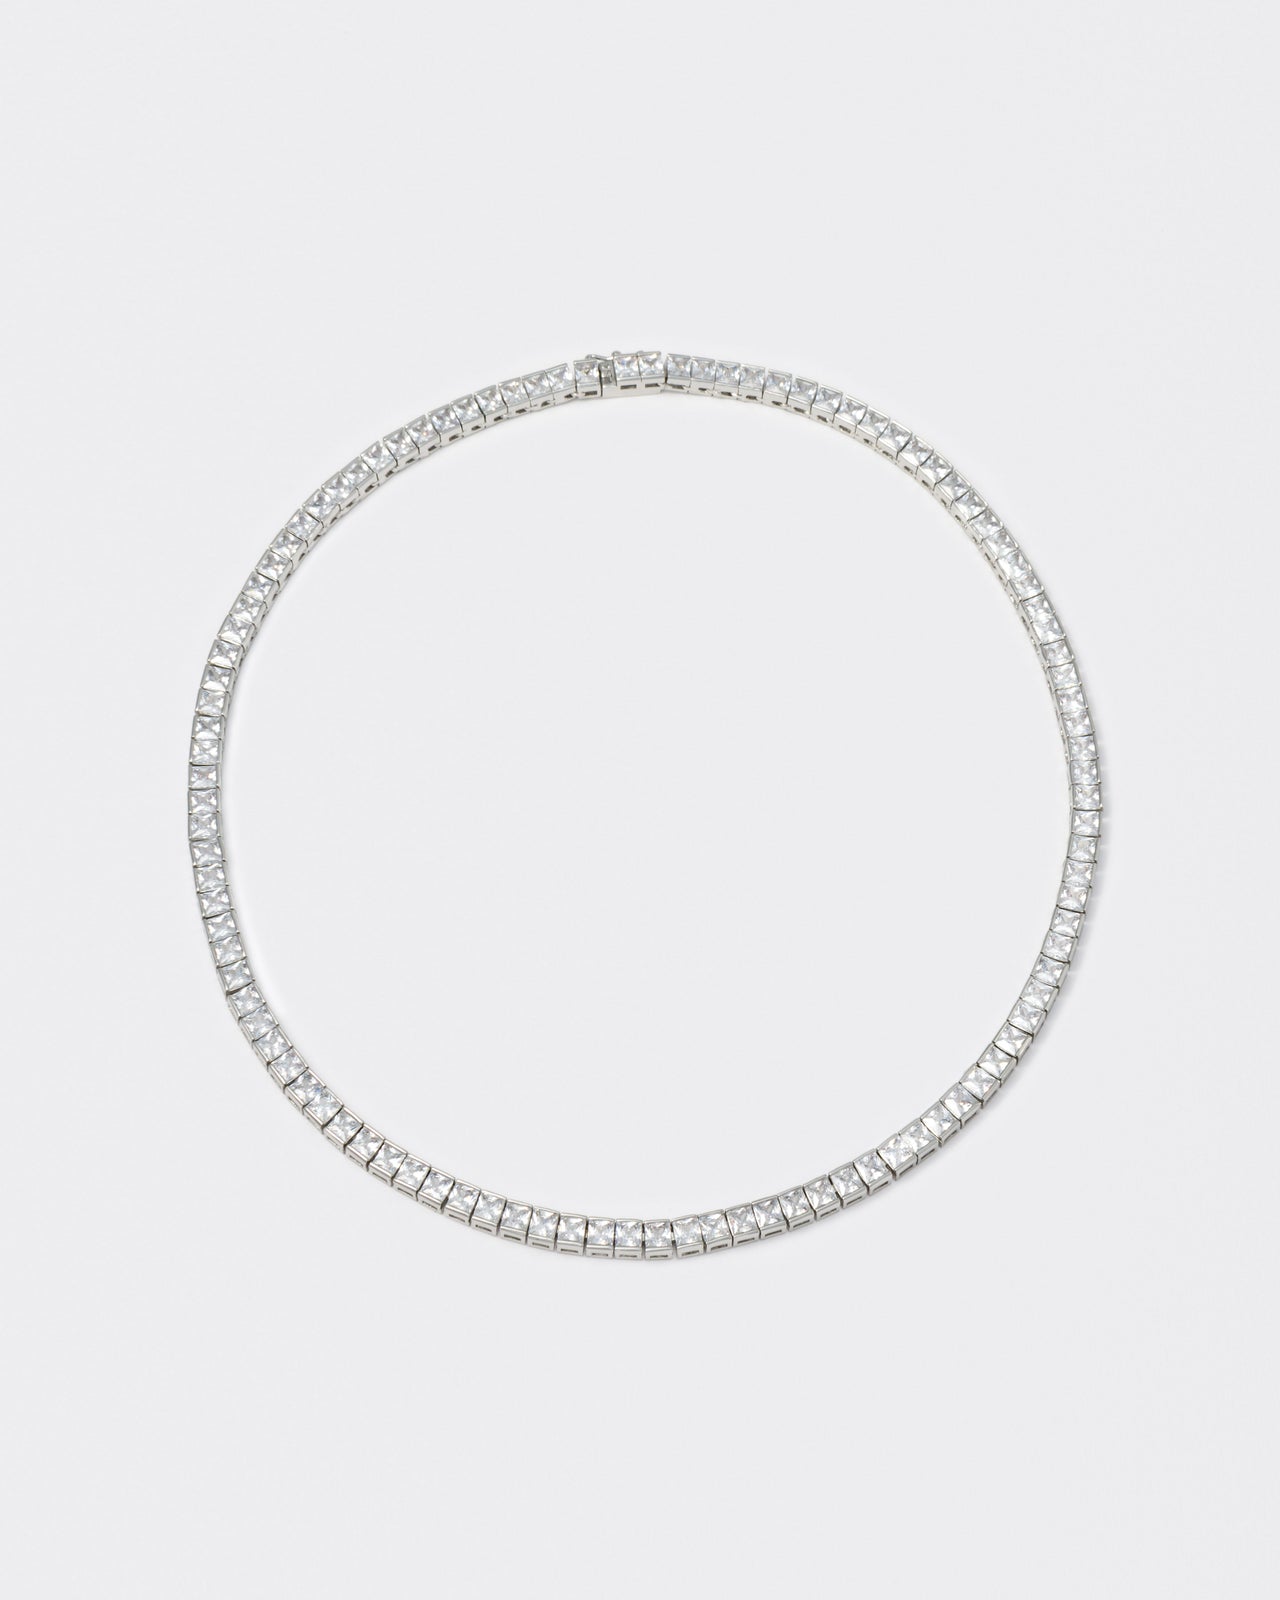 18k white gold coated tennis chain necklace with hand-set princess-cut stones in white